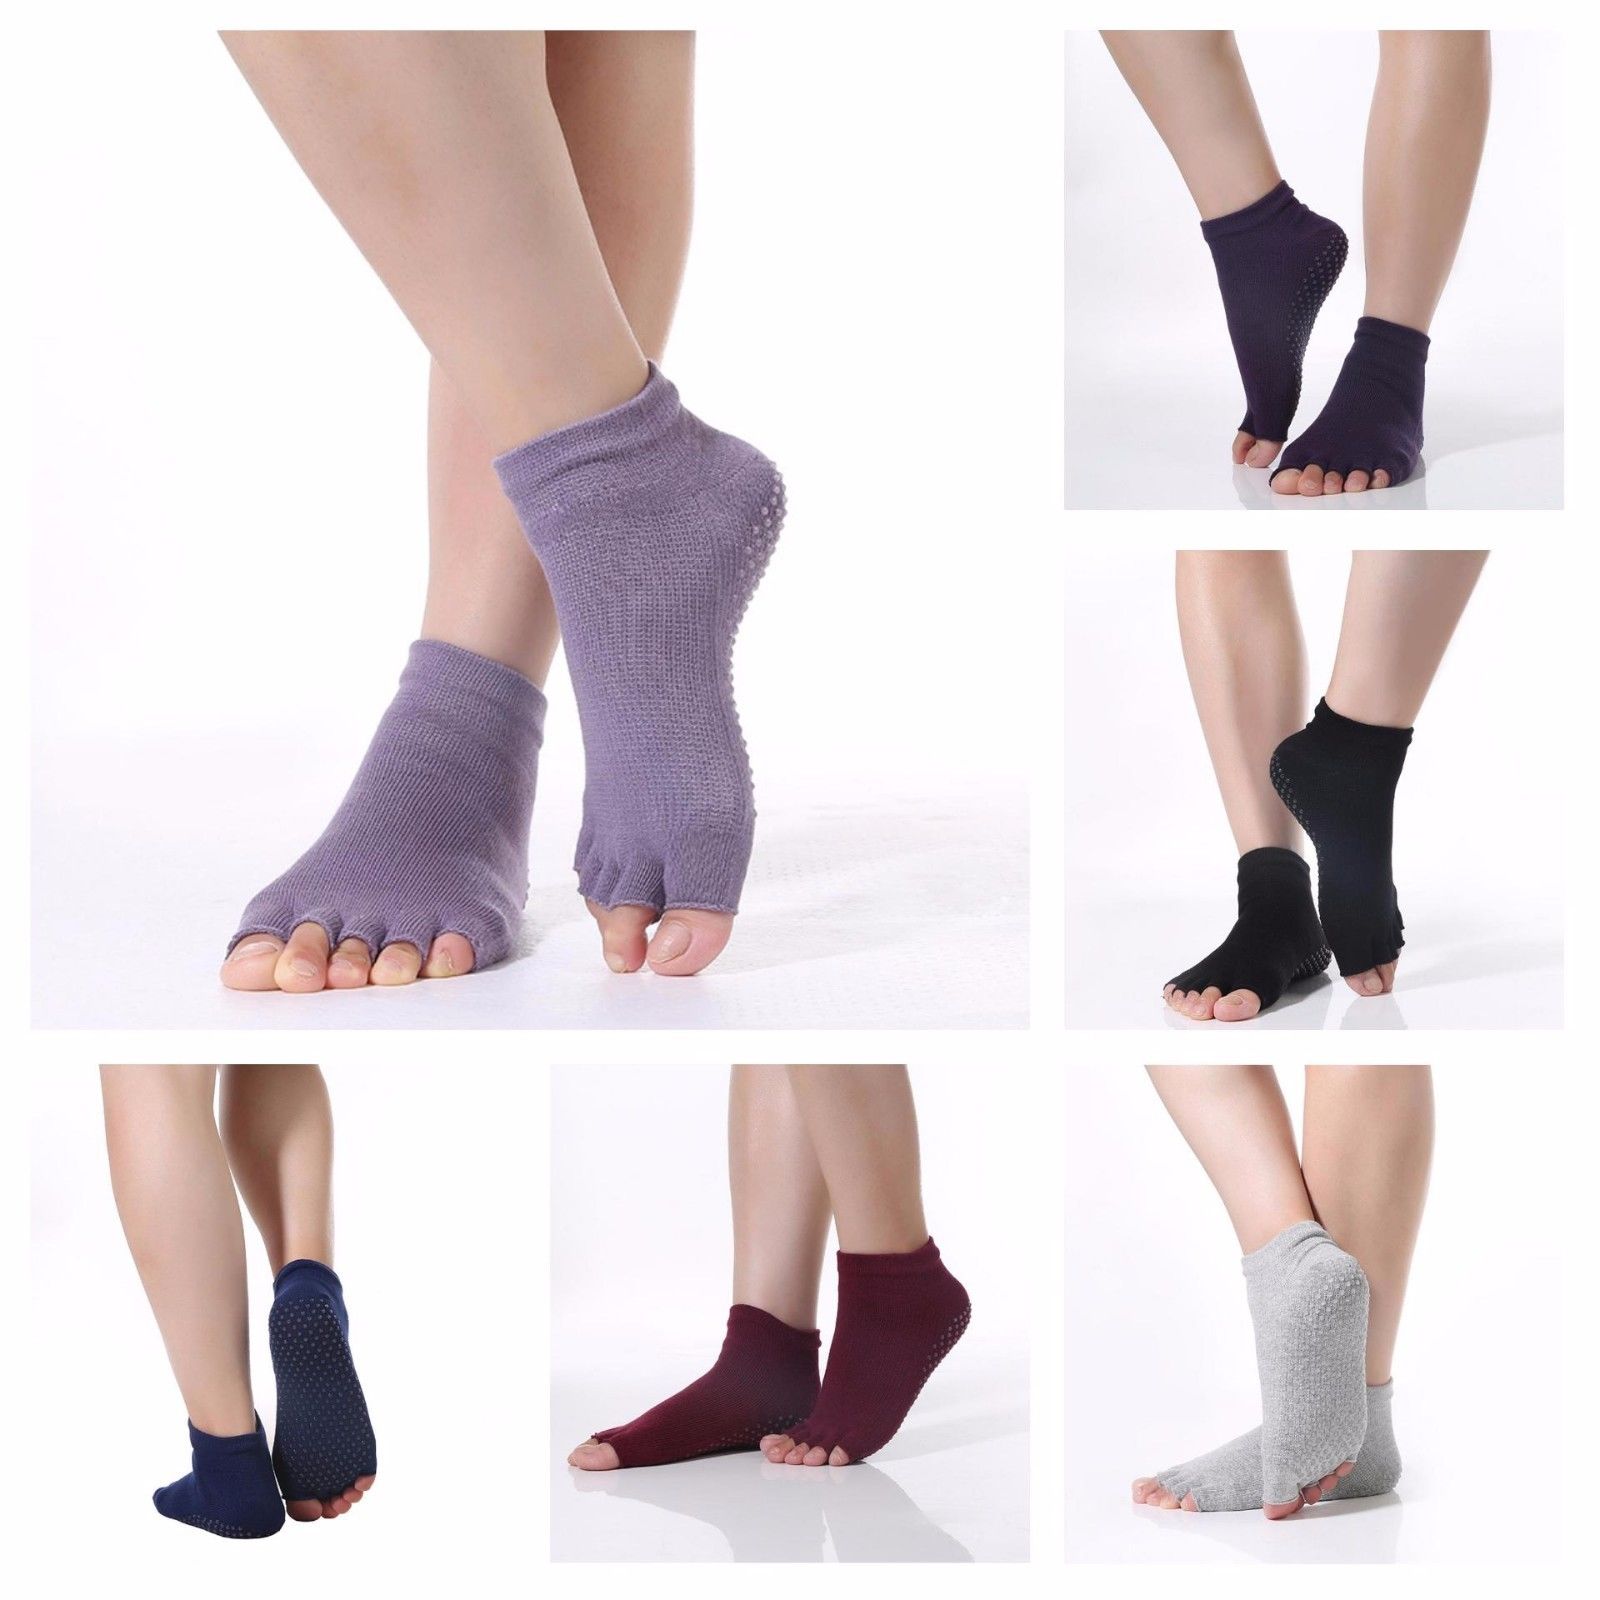 Soft Cotton Toeless Socks for Exercising, Dancing, Pedicures, Yoga,  Pilates, our just with a flip flop